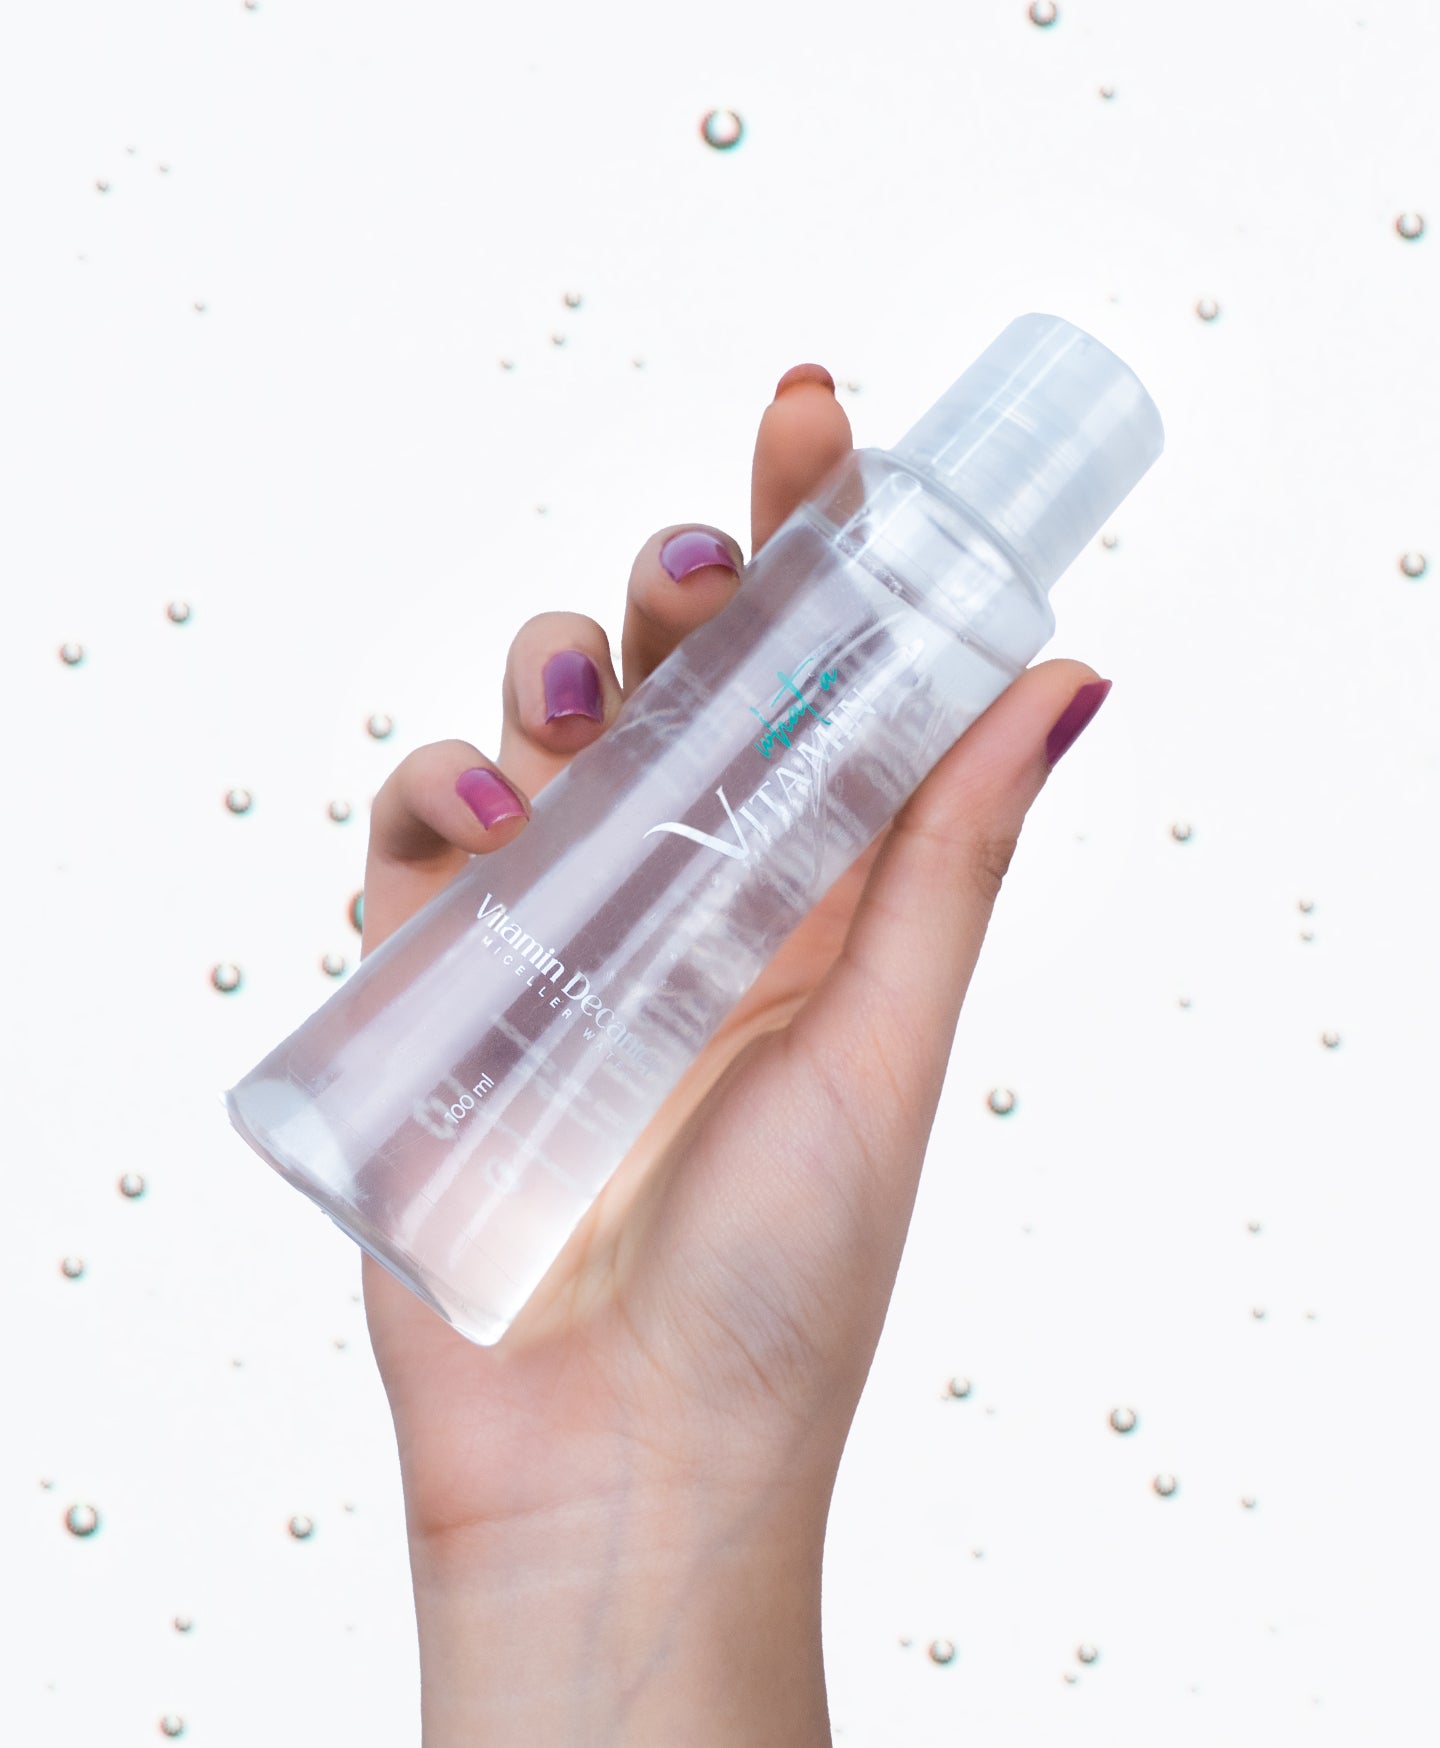 Vitamin Decanter (Micellar Water enriched with Vit.B3) - whatavitamin